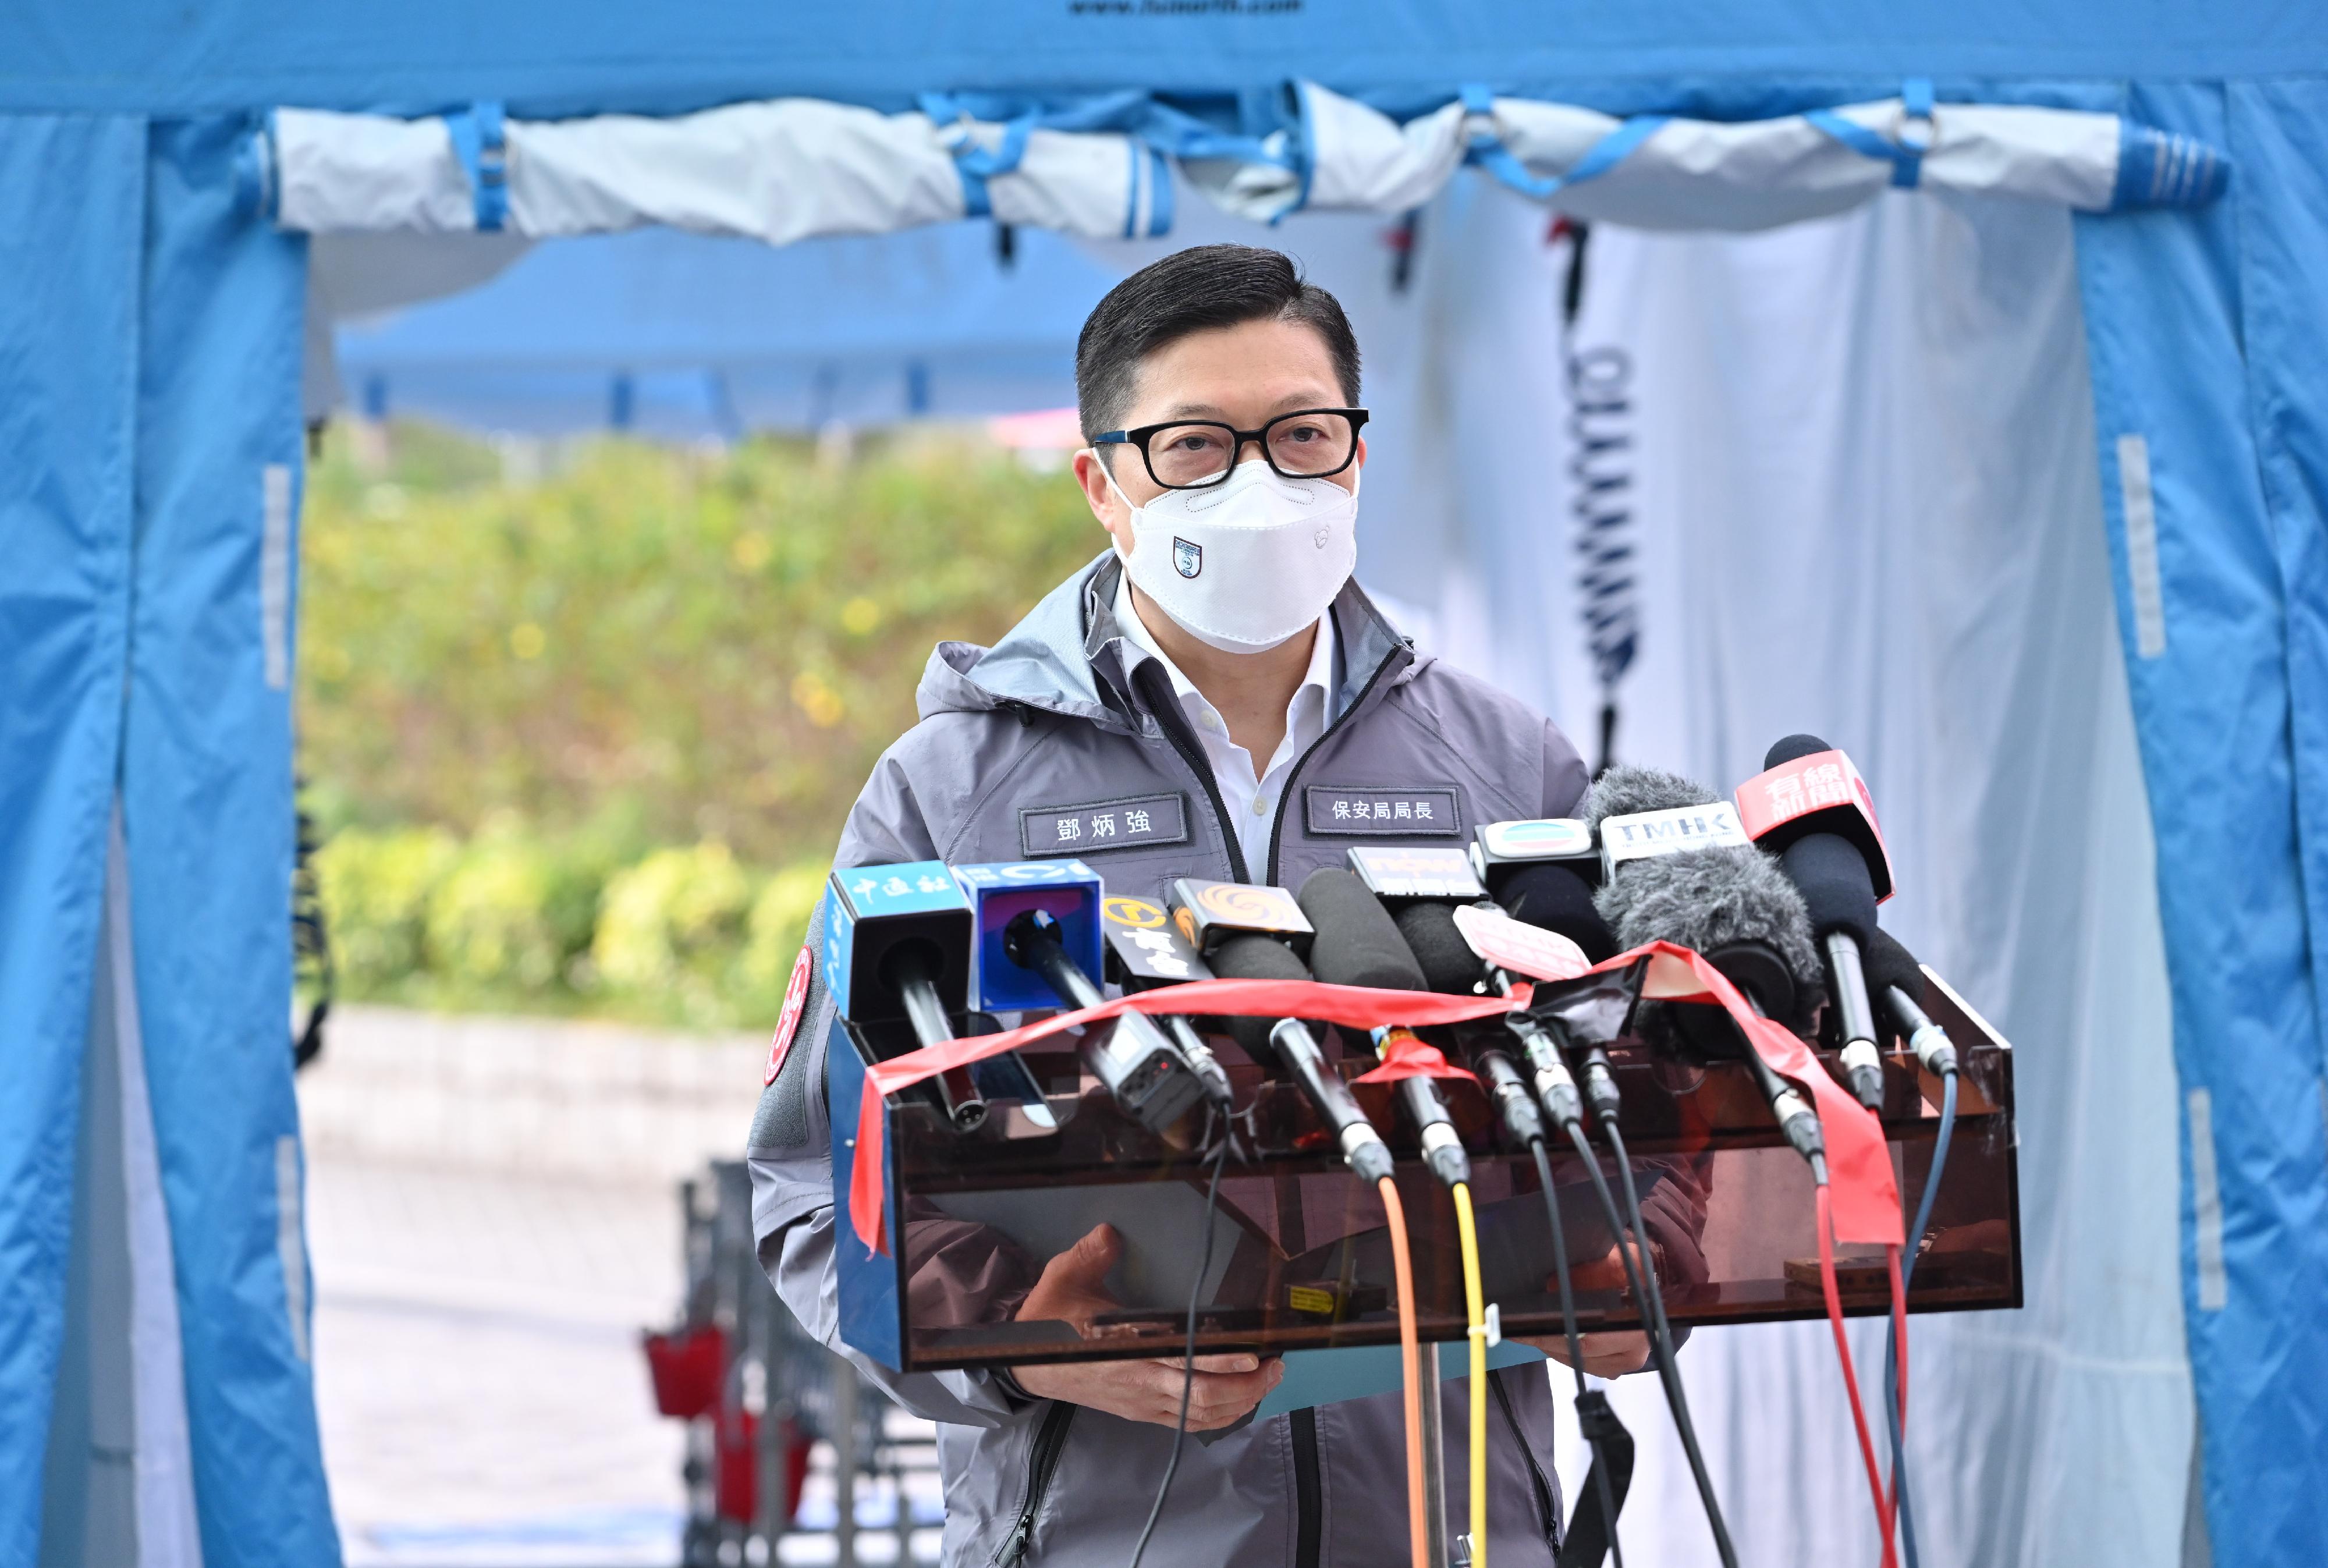 The Government conducted an inter-departmental exercise, "Checkerboard III", today (January 12). Photo shows the Secretary for Security, Mr Tang Ping-keung,  meeting the media at Ma Liu Shui Ferry Pier after observing the radiation checking and decontamination procedures for evacuees.